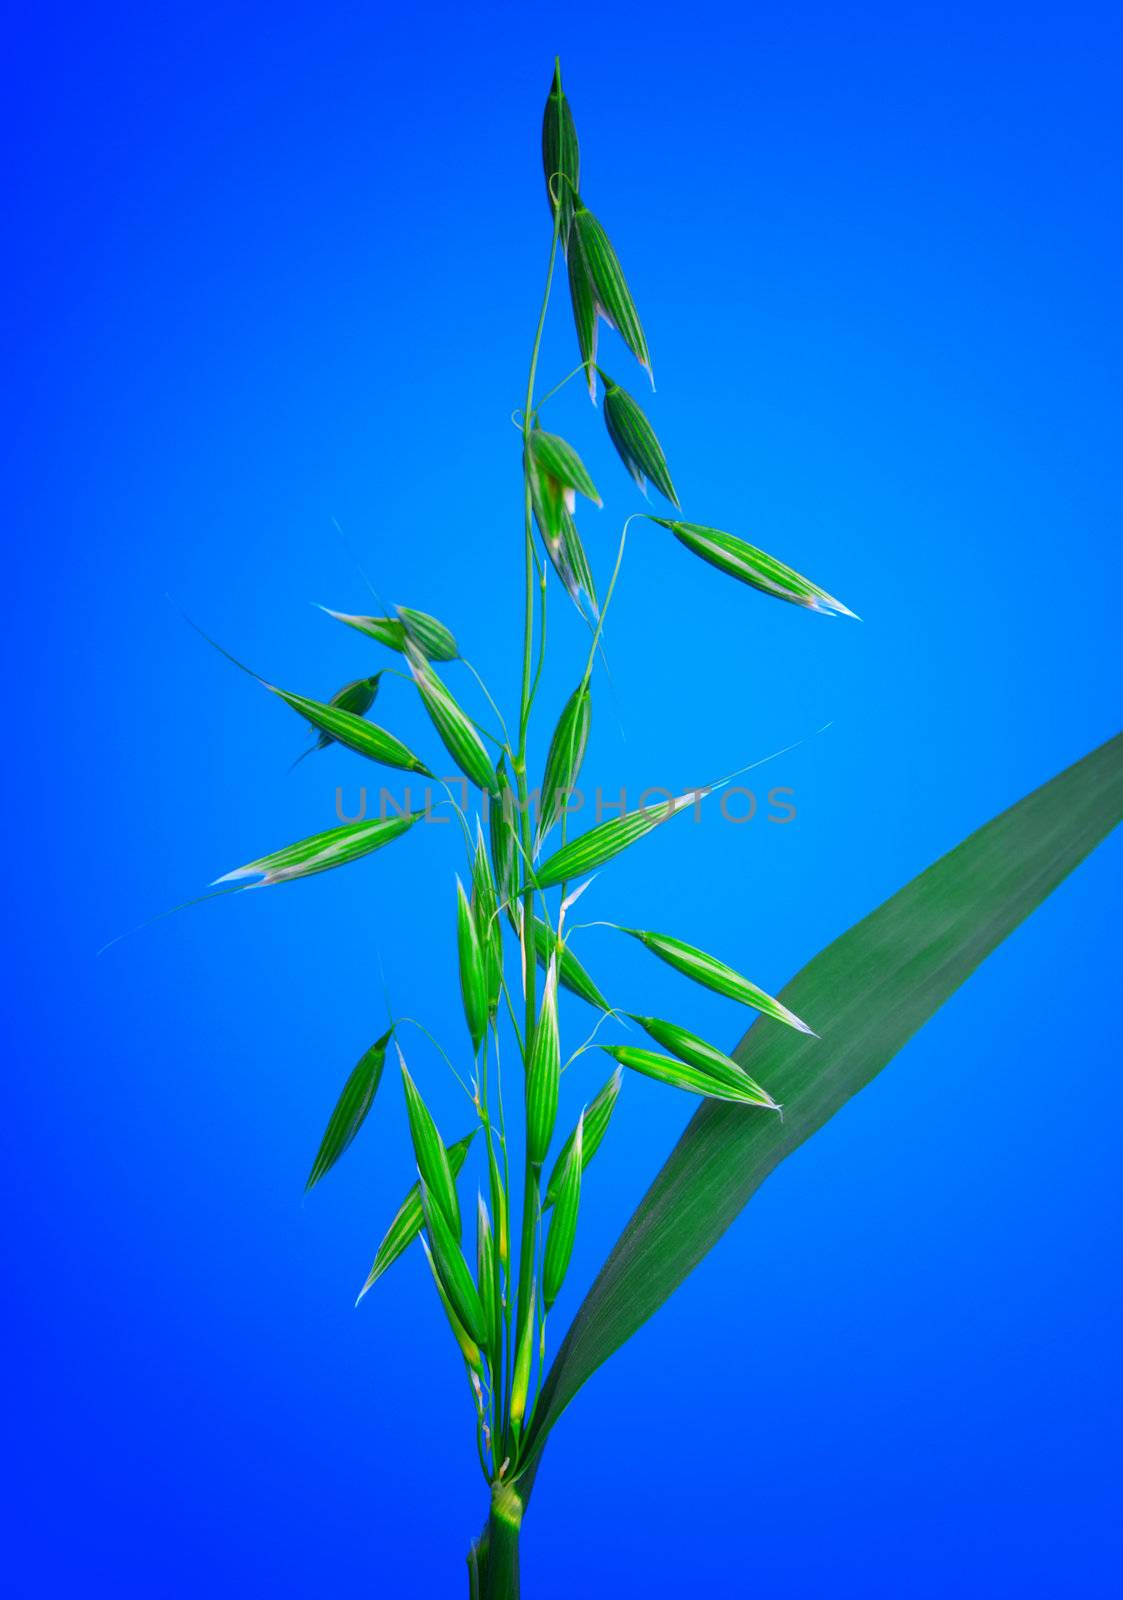 Green panicle of oat, on blue background